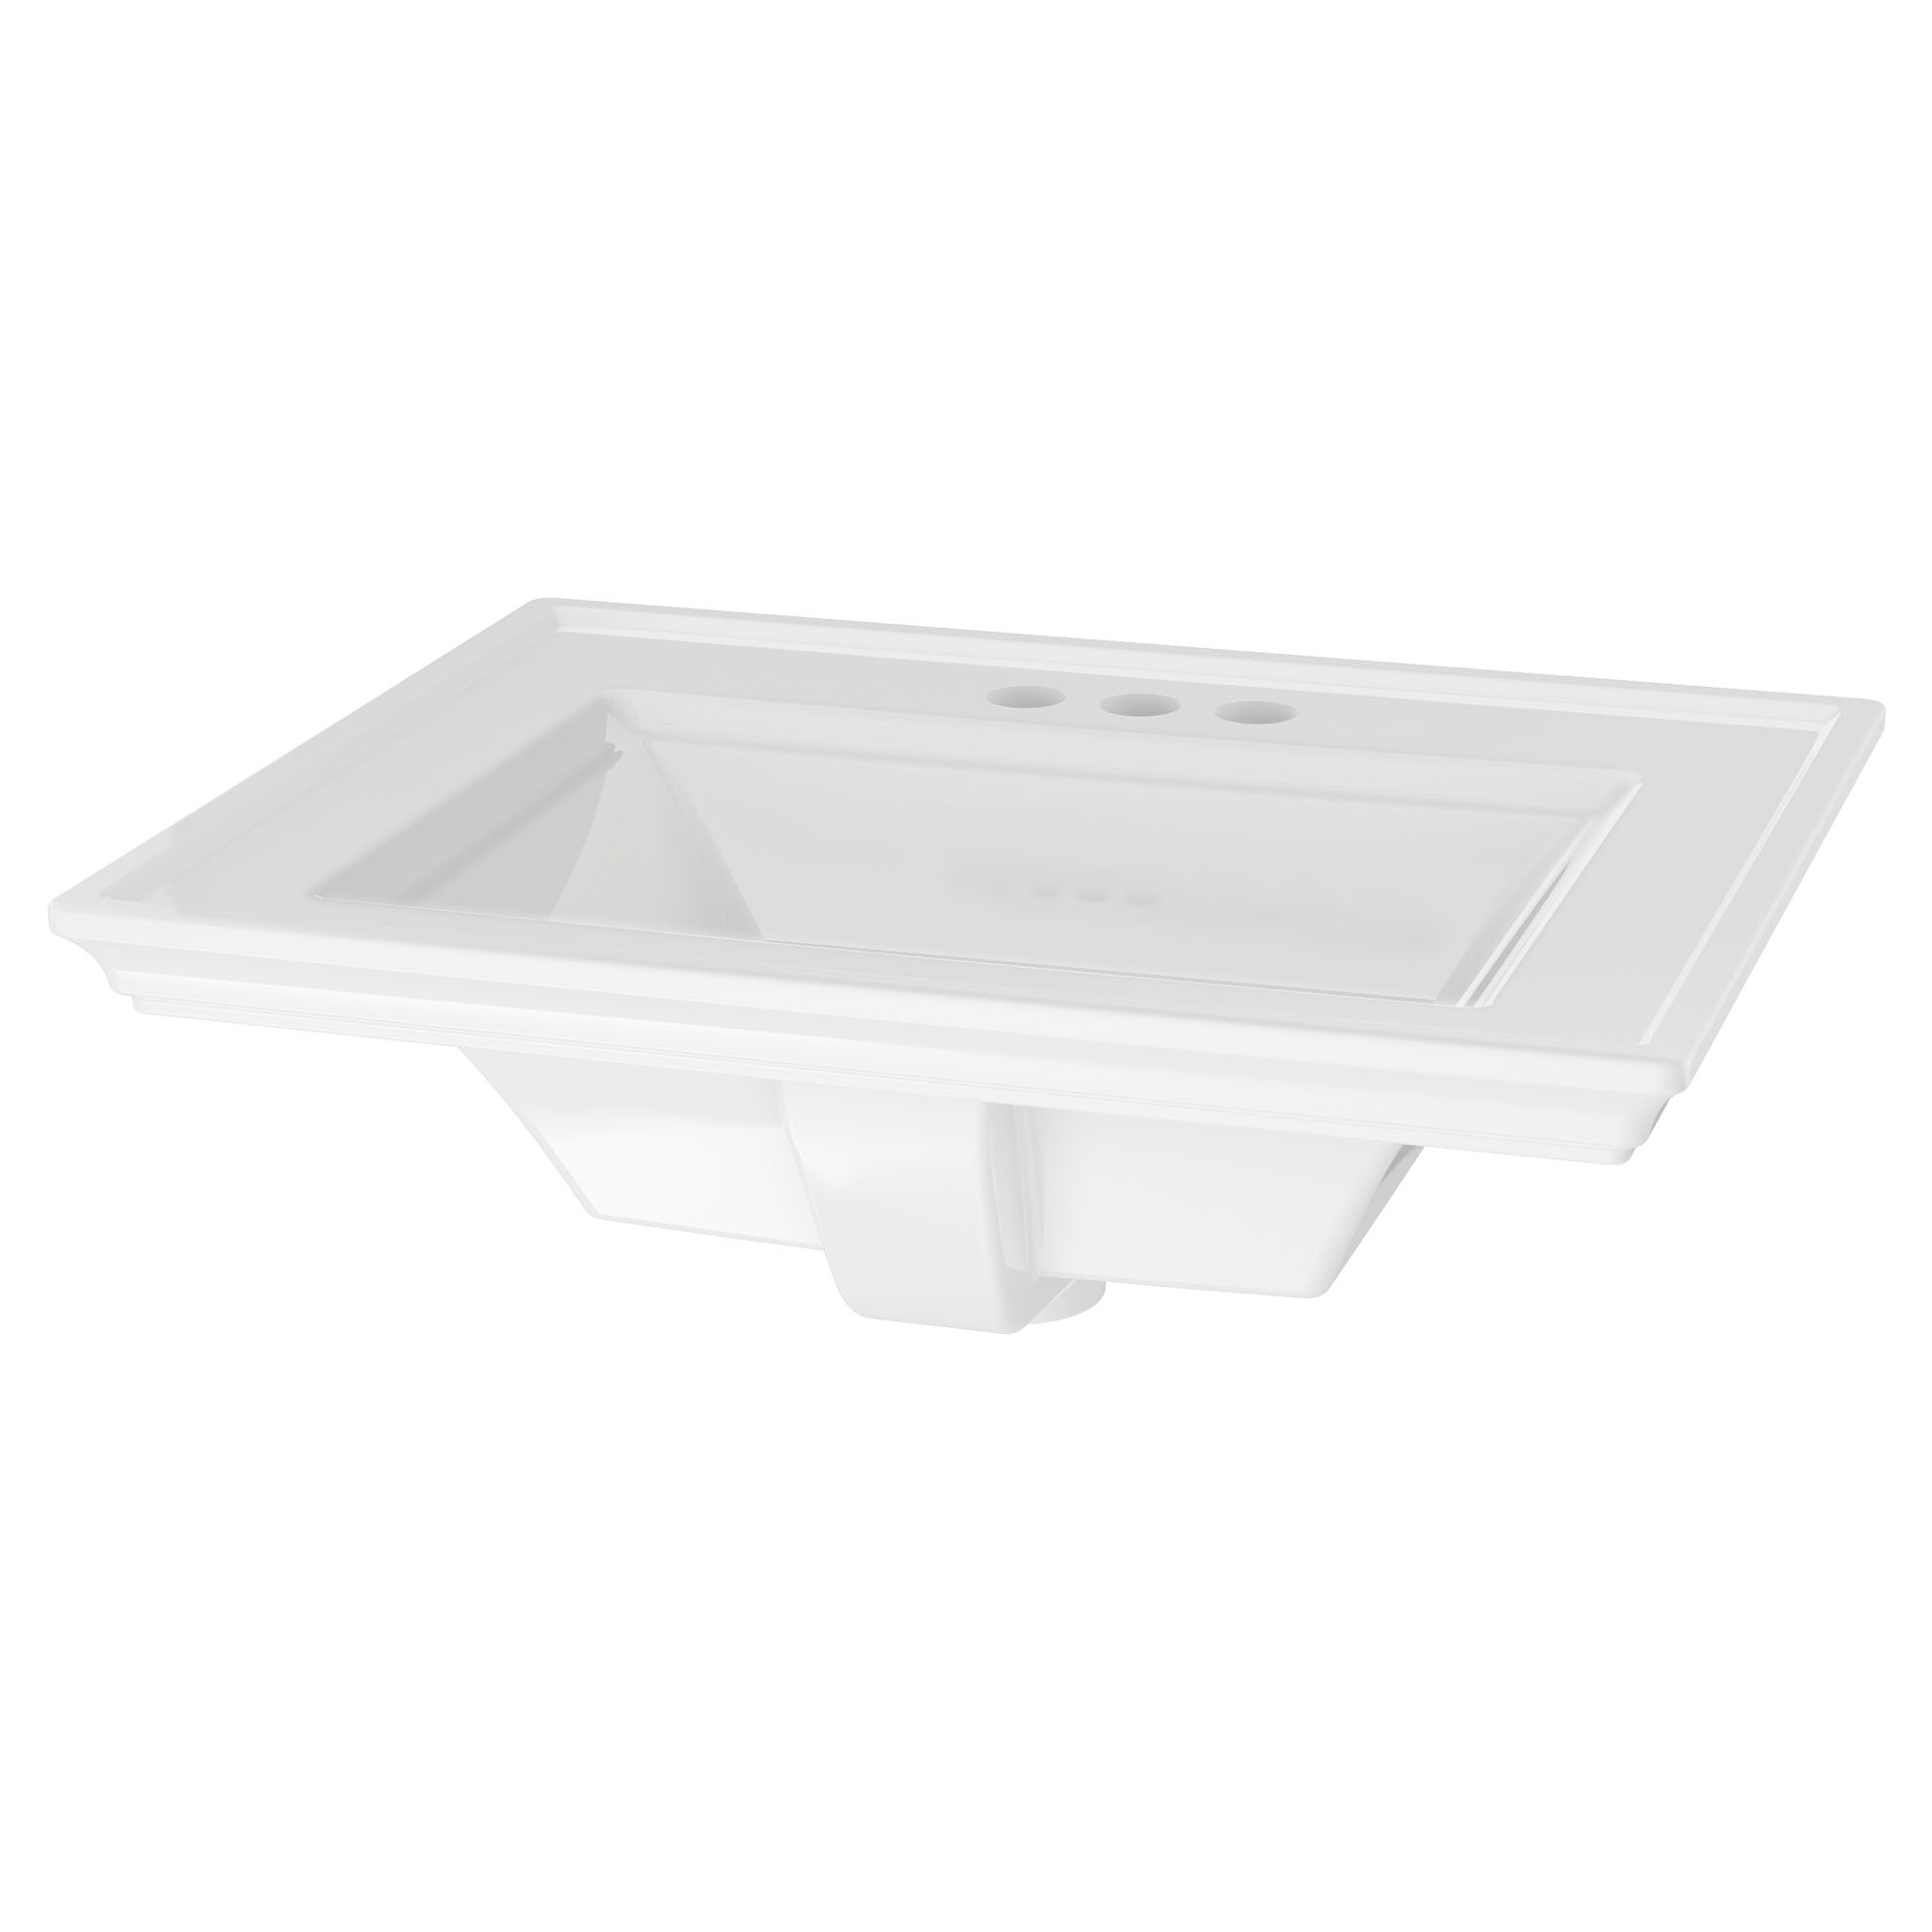 American Standard Town square s White Fire Clay Drop-In Rectangular Modern Bathroom Sink (24-in x 19.0625-in)